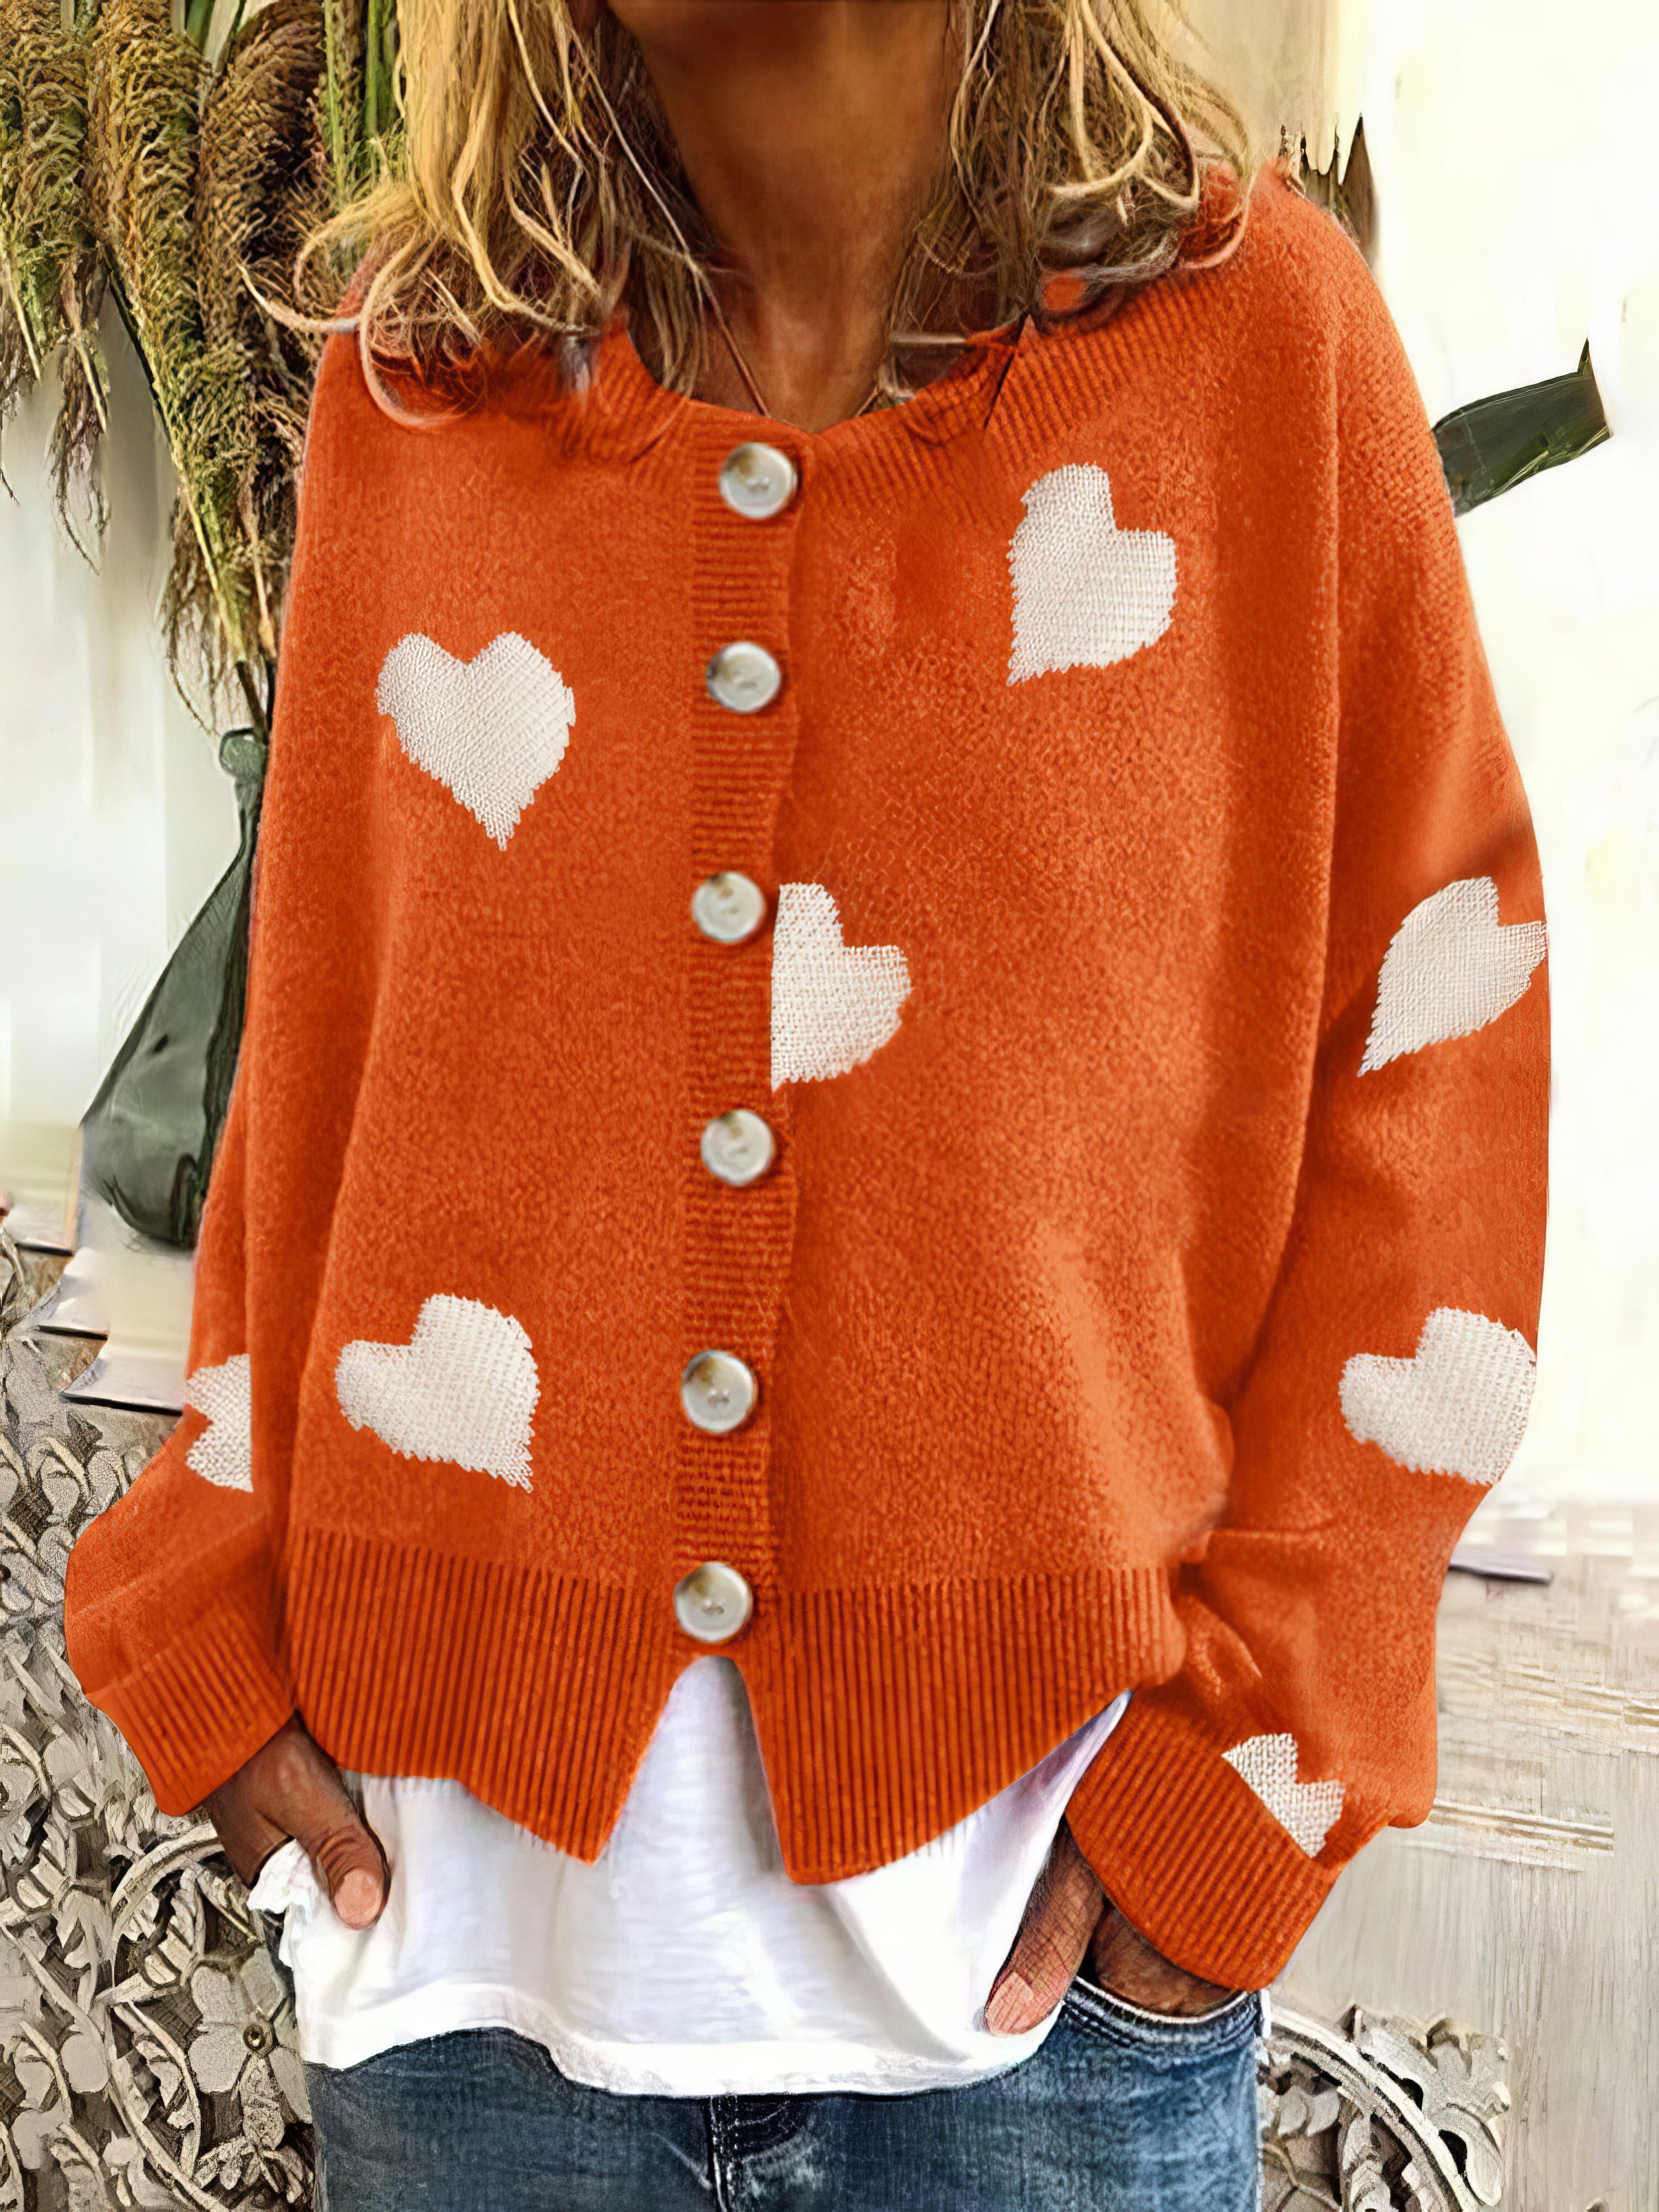 Knit Single-Breasted Heart Cardigan Sweater